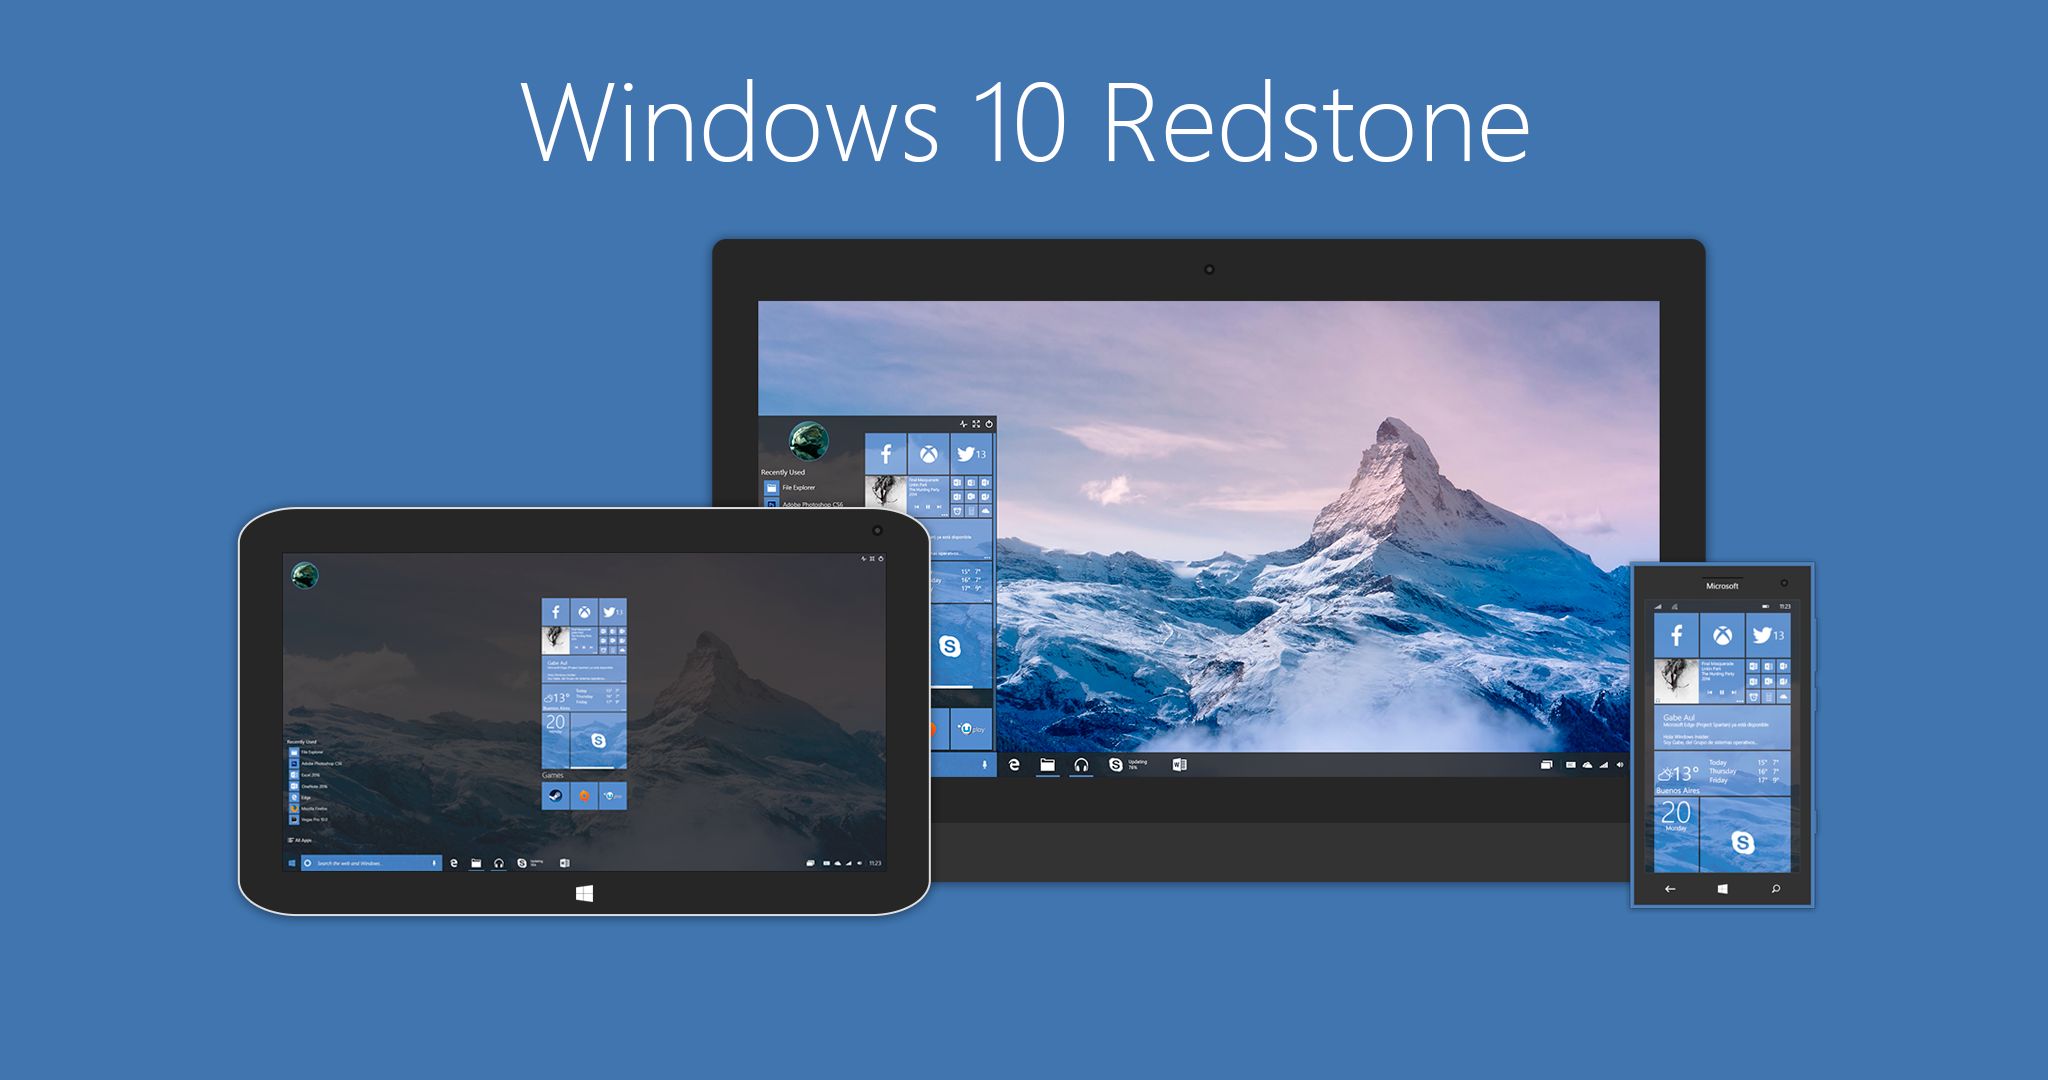 windows redstone concept imagines the first major windows 10 update 491982 2